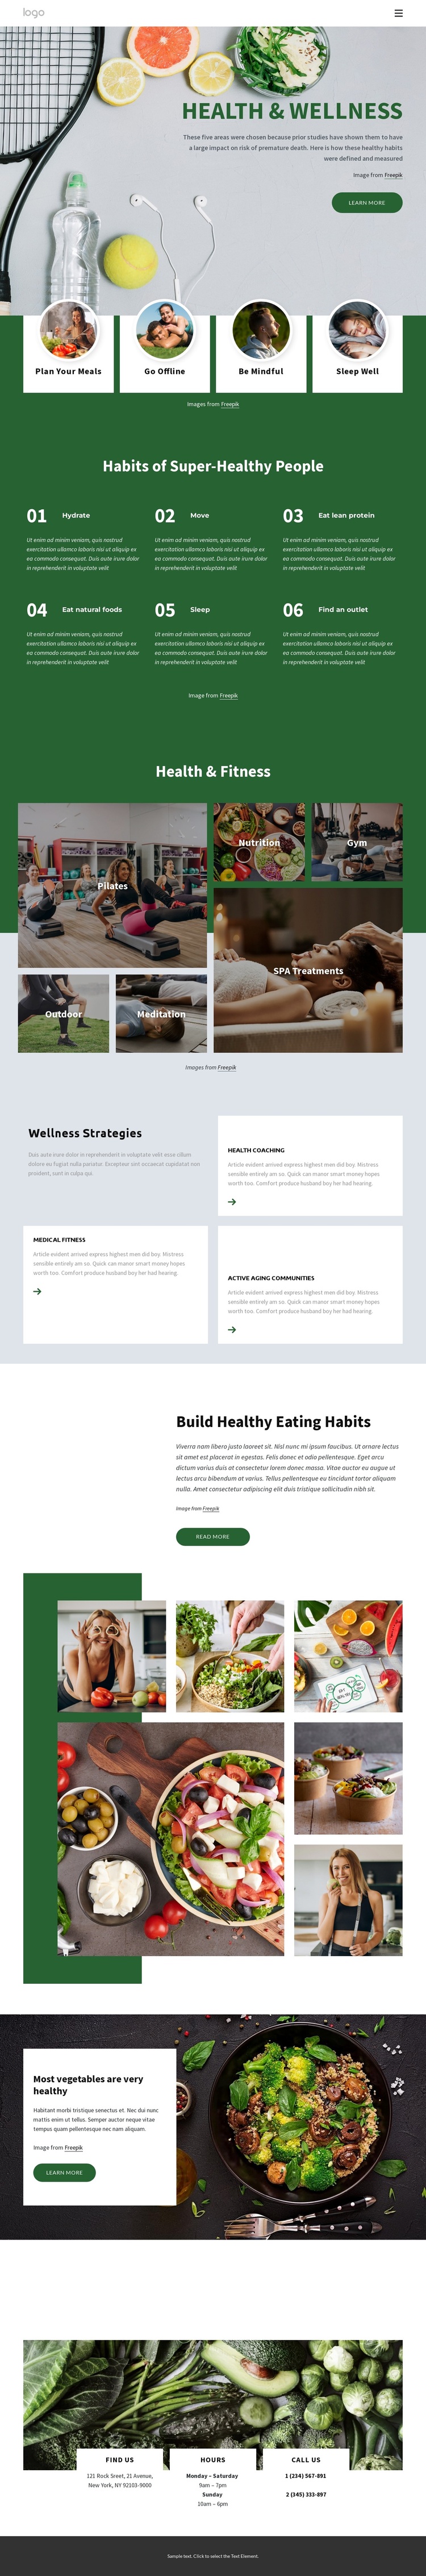 Health and wellness center Joomla Page Builder